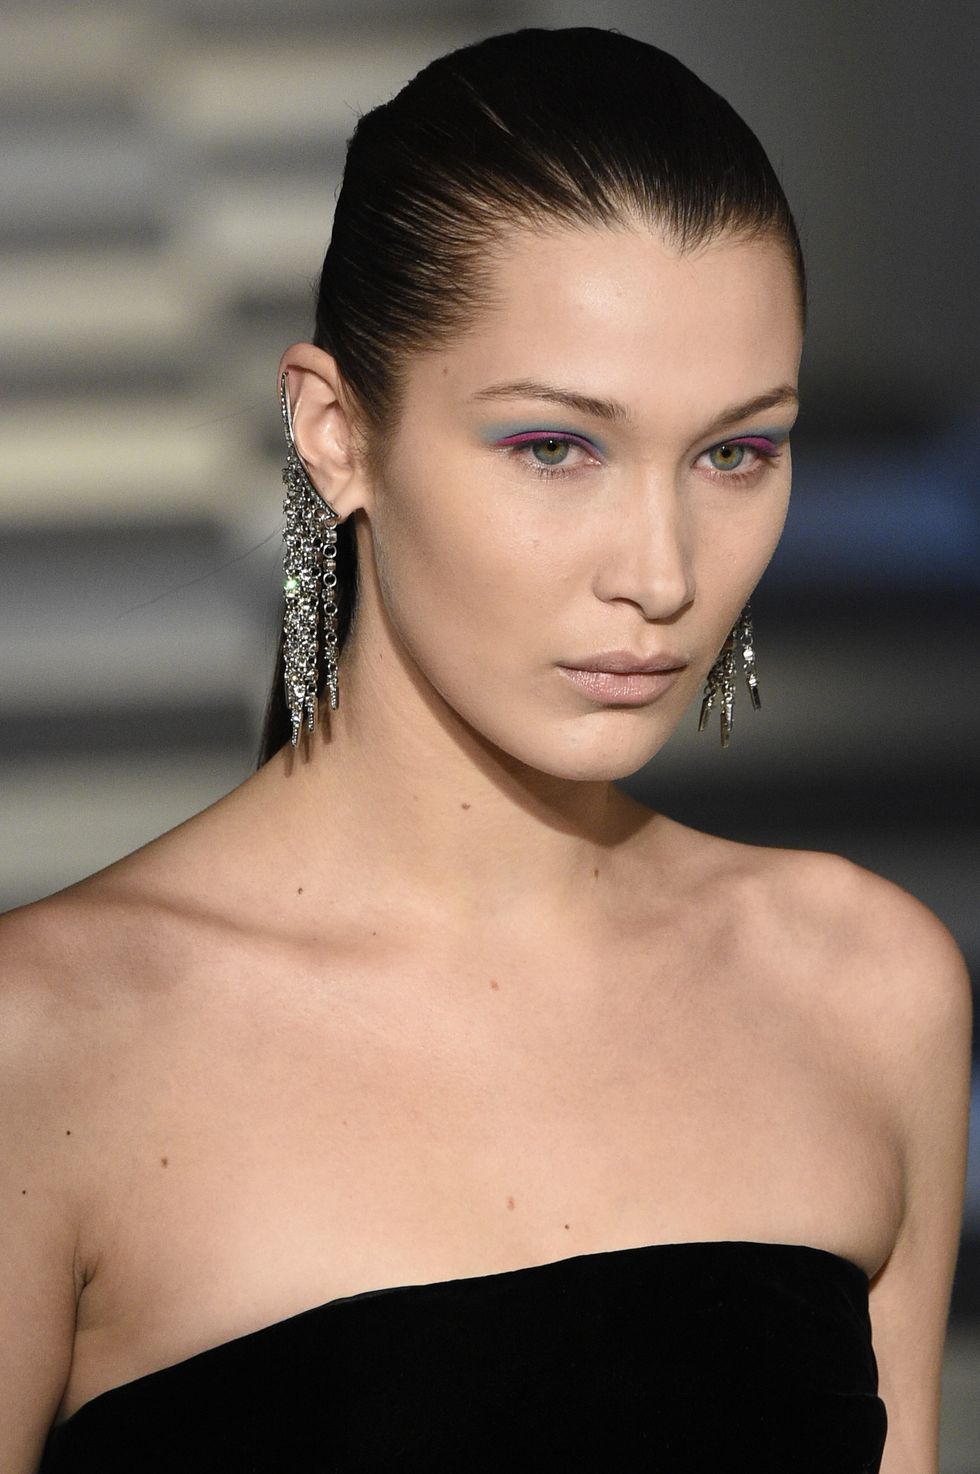 NEW YORK, NY - FEBRUARY 13:  Bella Hadid, beauty detail, walk the runway at the Oscar de La Renta fashion show during February 2017 New York Fashion Week: The Shows  at Gallery 1, Skylight Clarkson Sq on February 13, 2017 in New York City.  (Photo by Peter White/Getty Images)